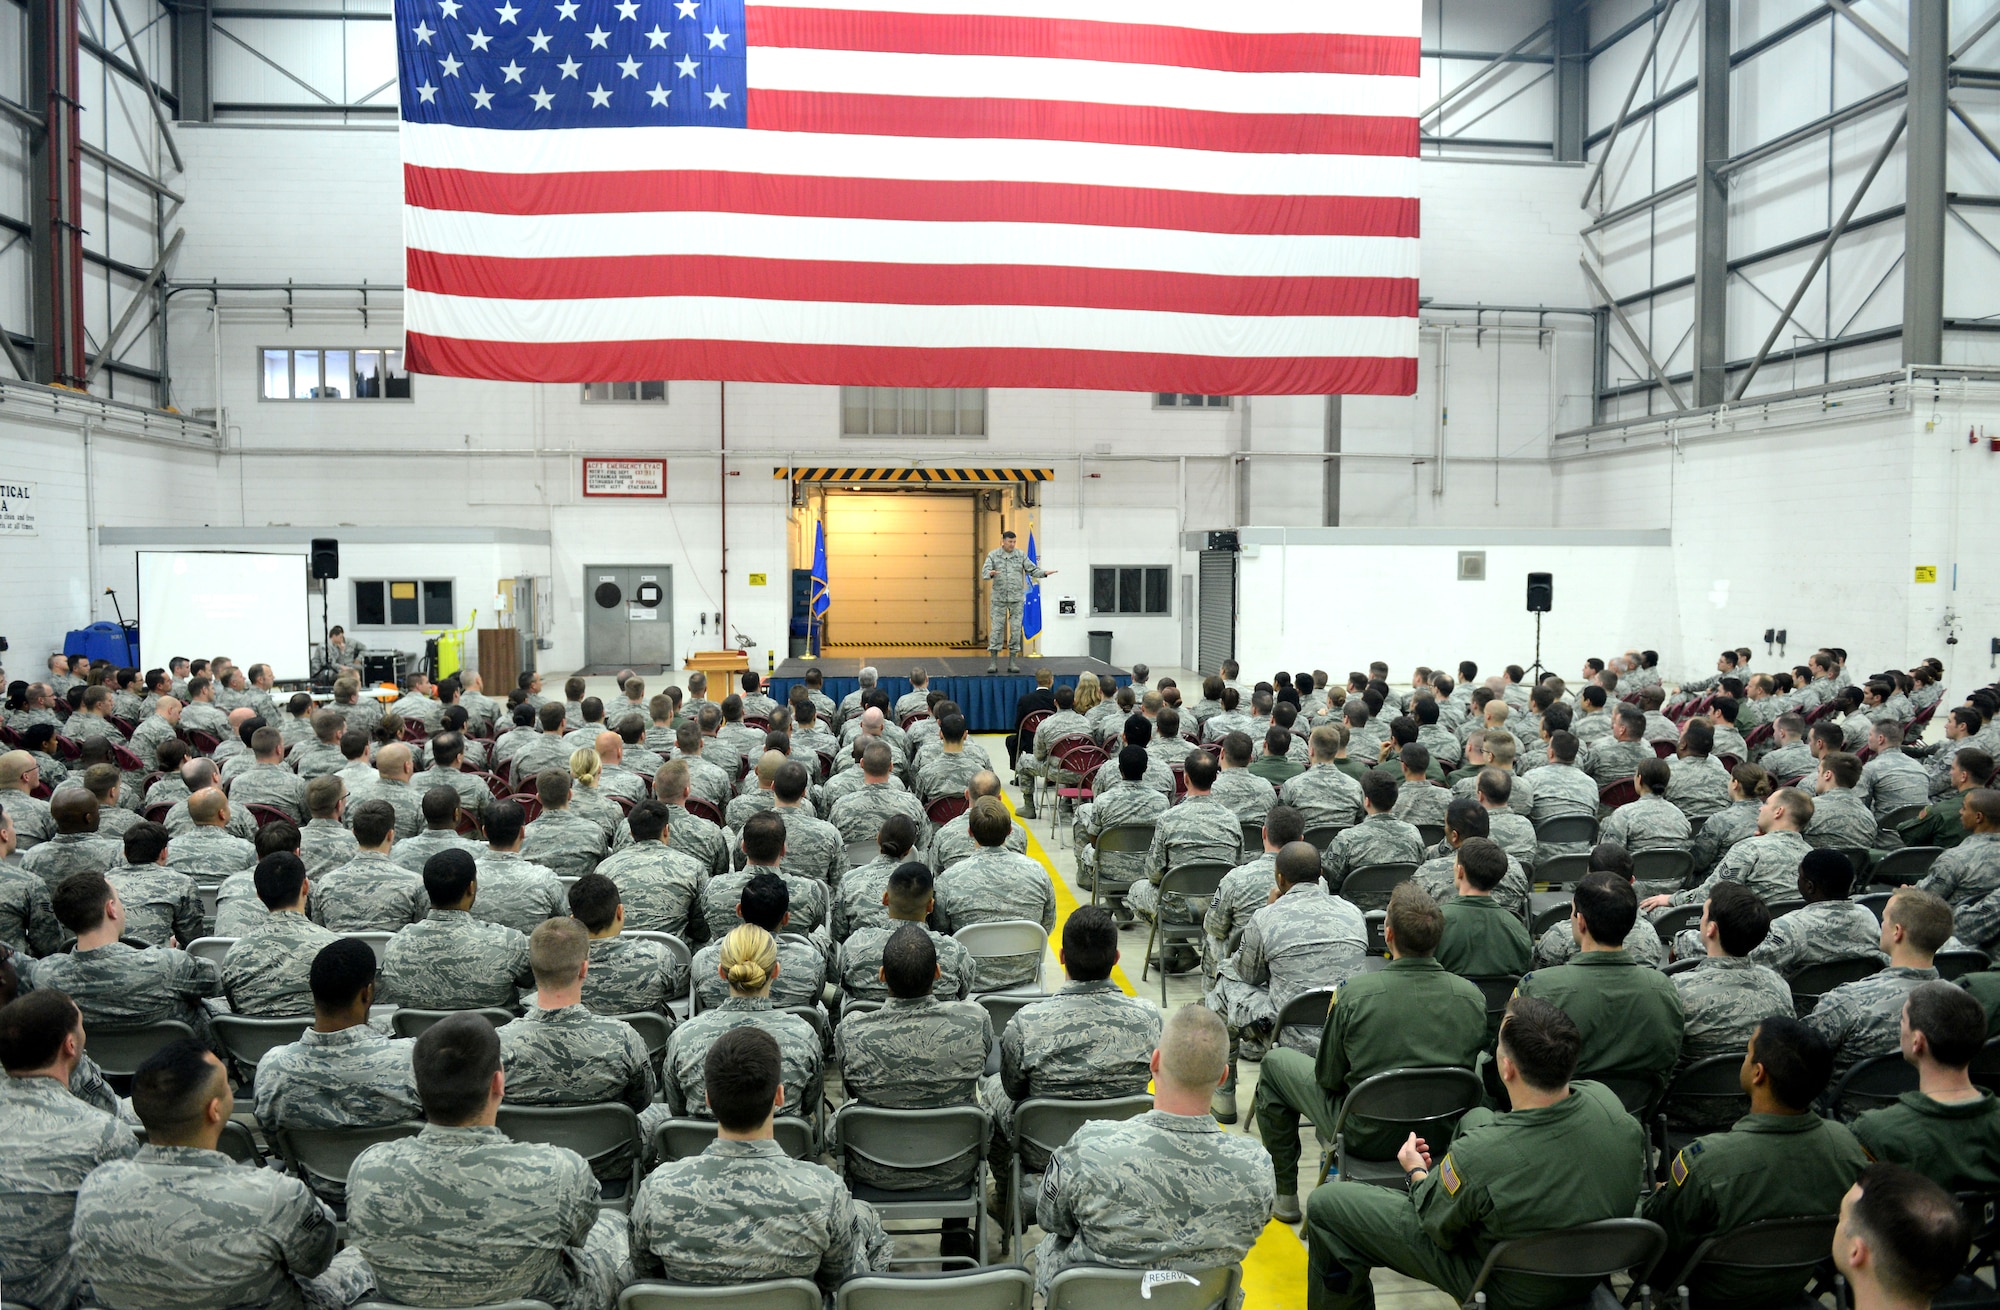 Air Commandos listen while Lt. Gen. Bradley Heithold, Air Force Special Operations Command commander, speaks during the 352nd Special Operations Group All-Call in hangar 803 Oct. 27, 2014, on RAF Mildenhall, England. Heithold visited a multitude of Airmen and their workplaces to discuss important matters, get a better understanding of their needs to accomplish the mission as well as deliver his vision and priorities. (U.S. Air Force photo by Senior Airman Kate Maurer)